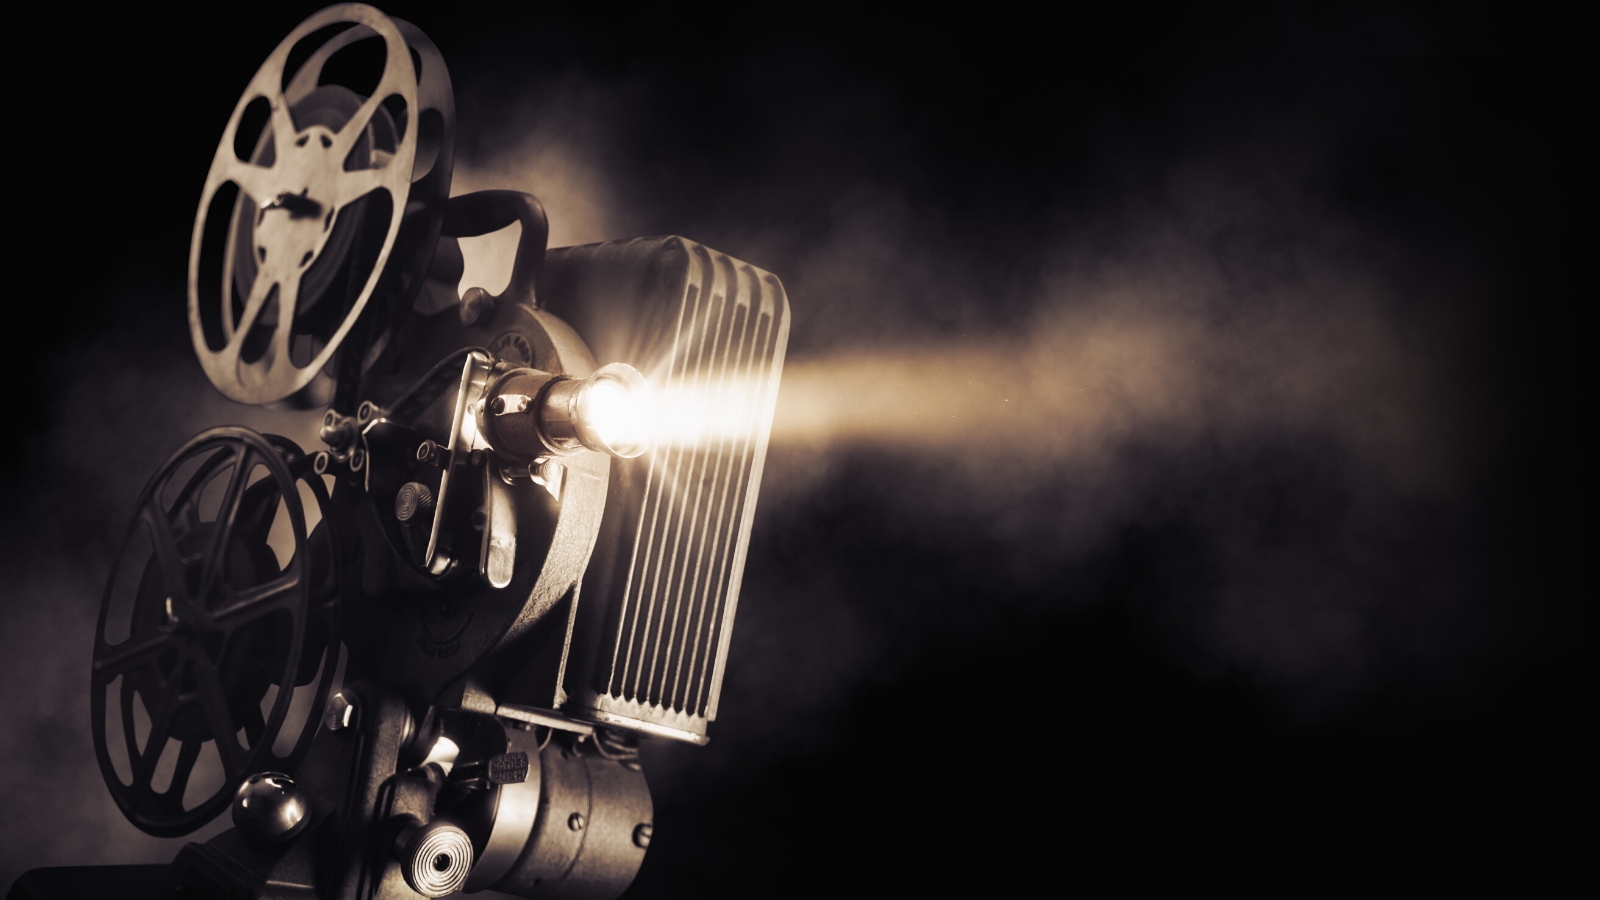 A close up image of a cinema projector